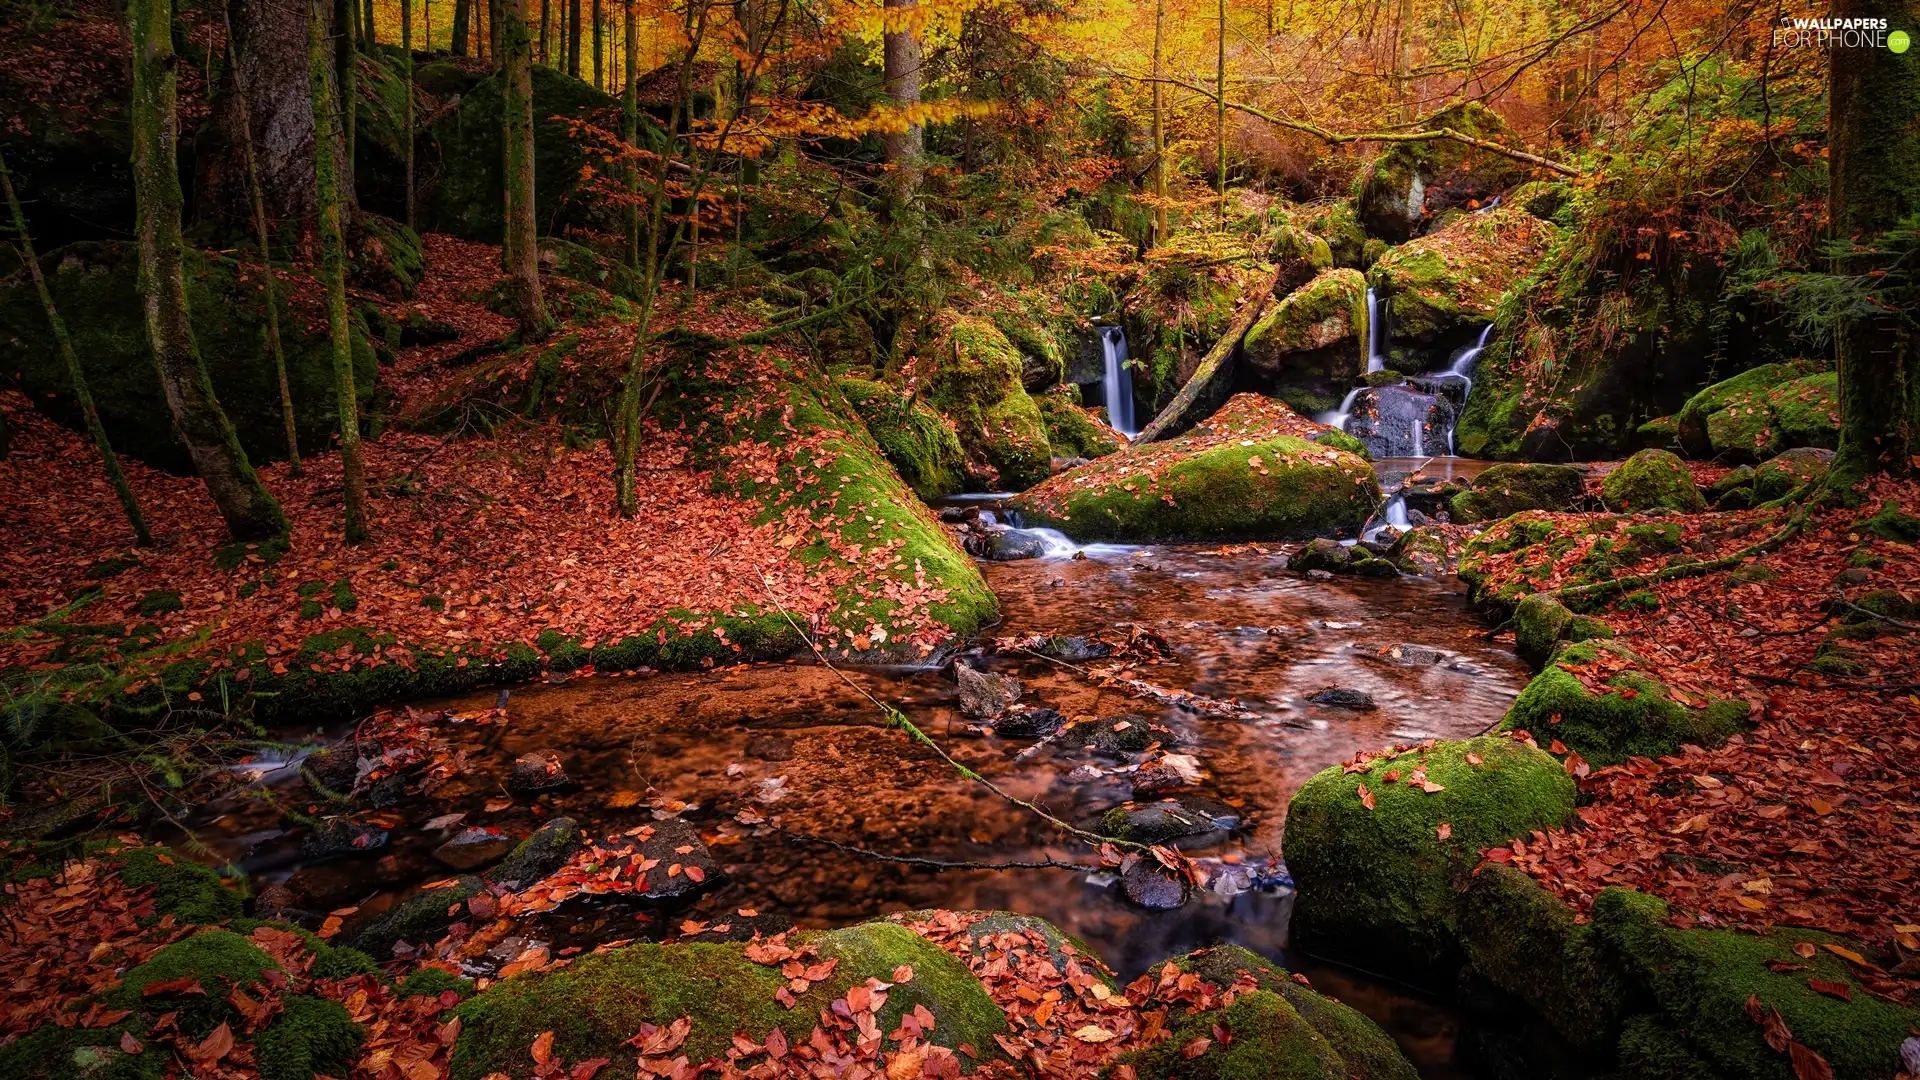 Stones, River, viewes, fallen, mossy, forest, trees, Leaf, autumn, rocks